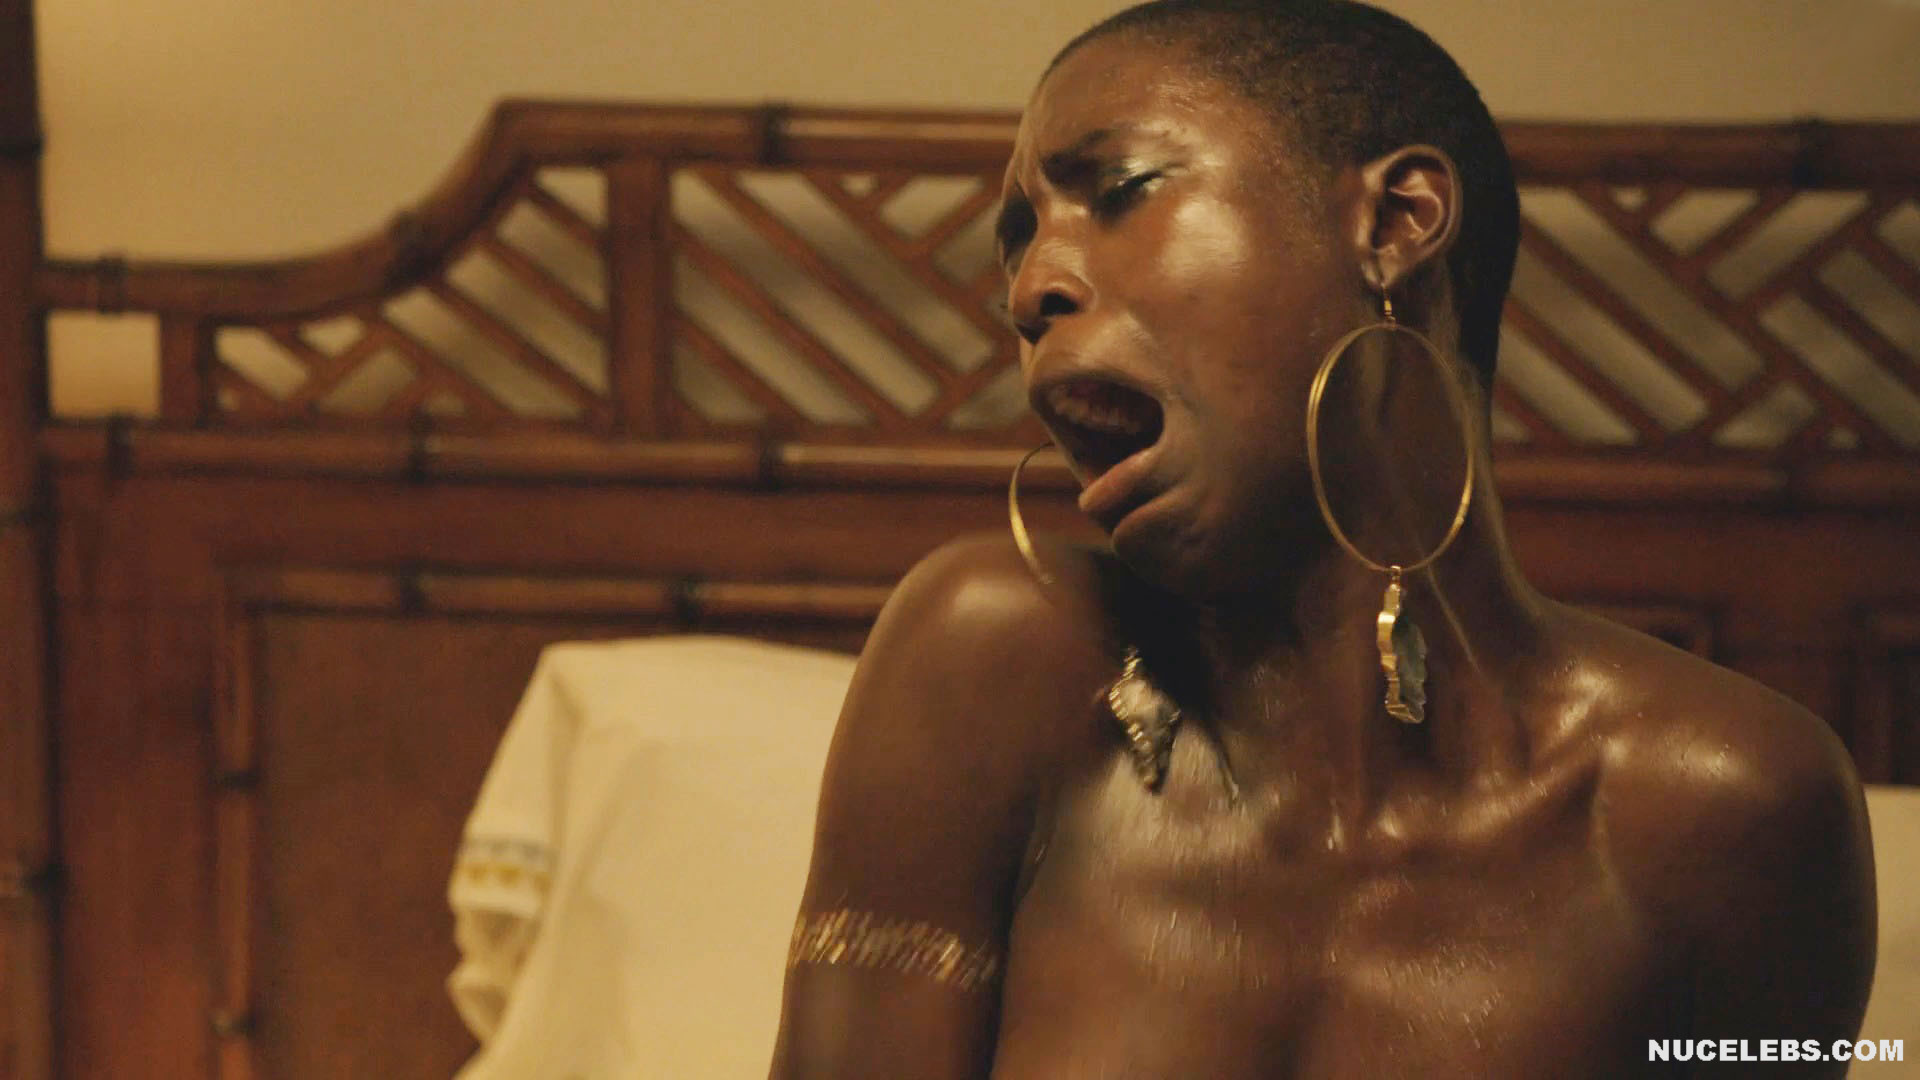 And you will undoubtedly do it by looking at Jodie Turner Smith’s nude puss...